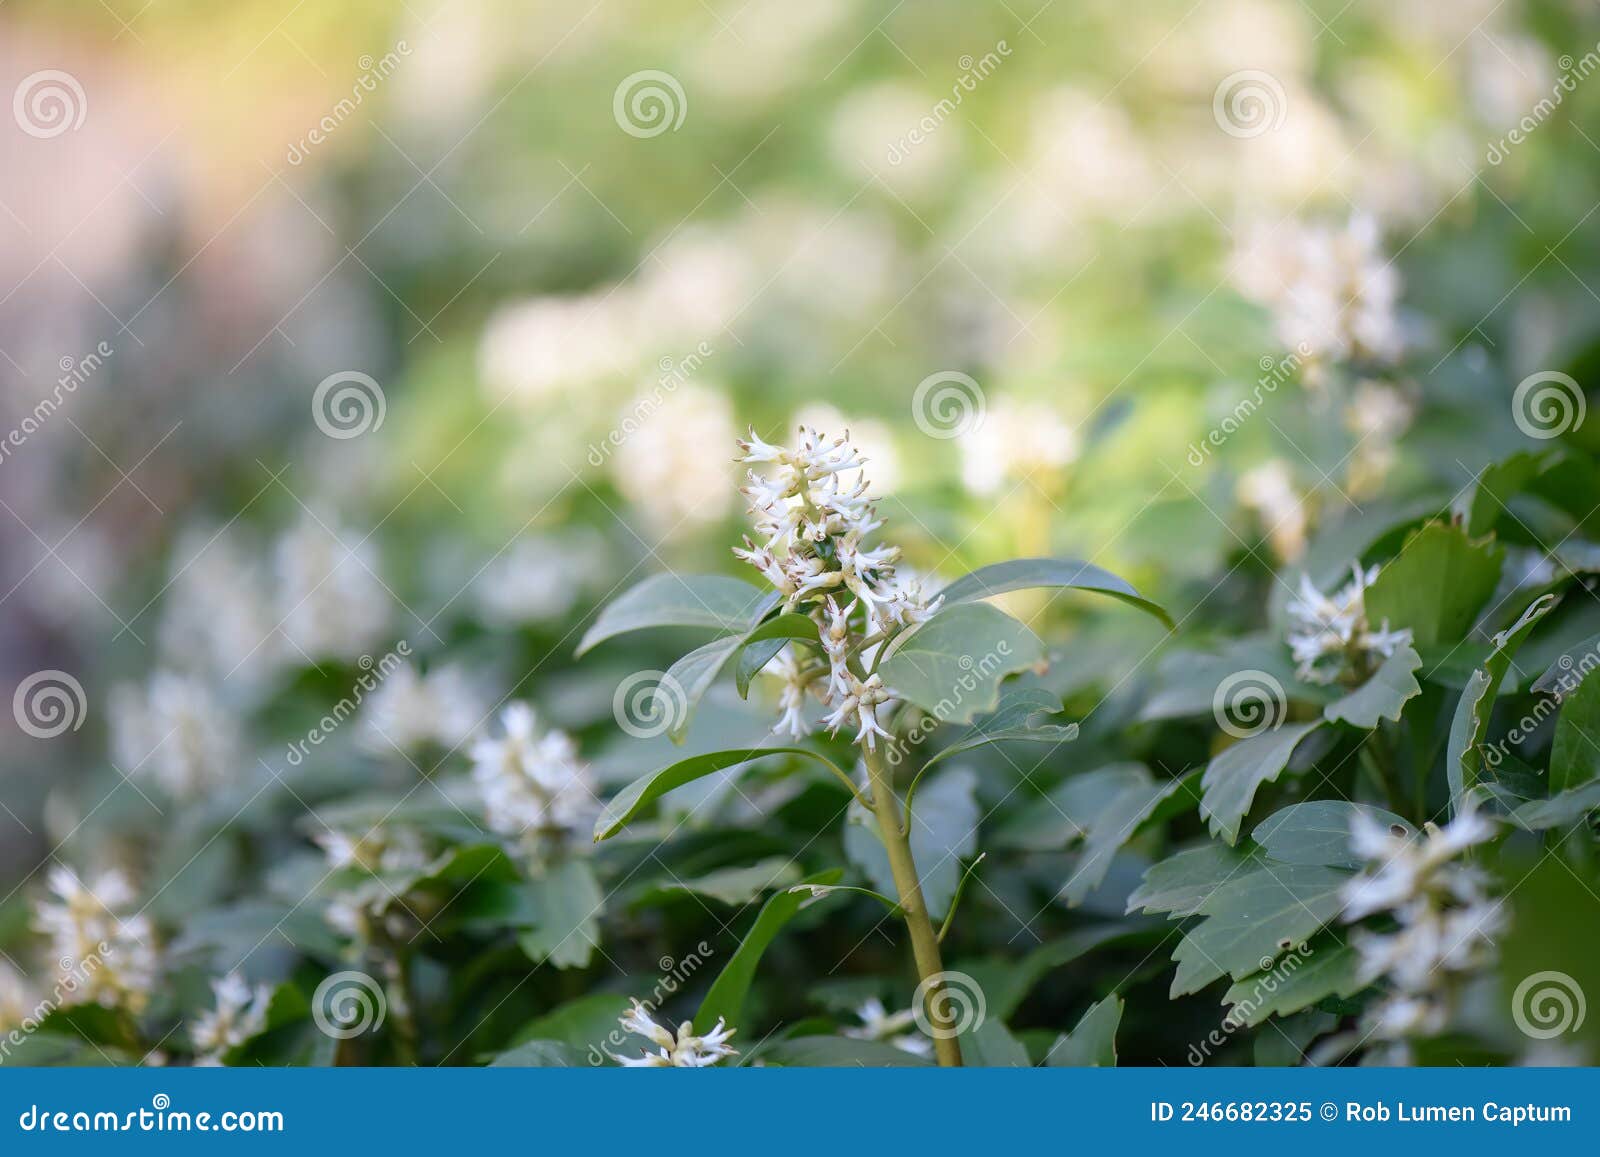 japanese pachysandra terminalis, plants with white flowers